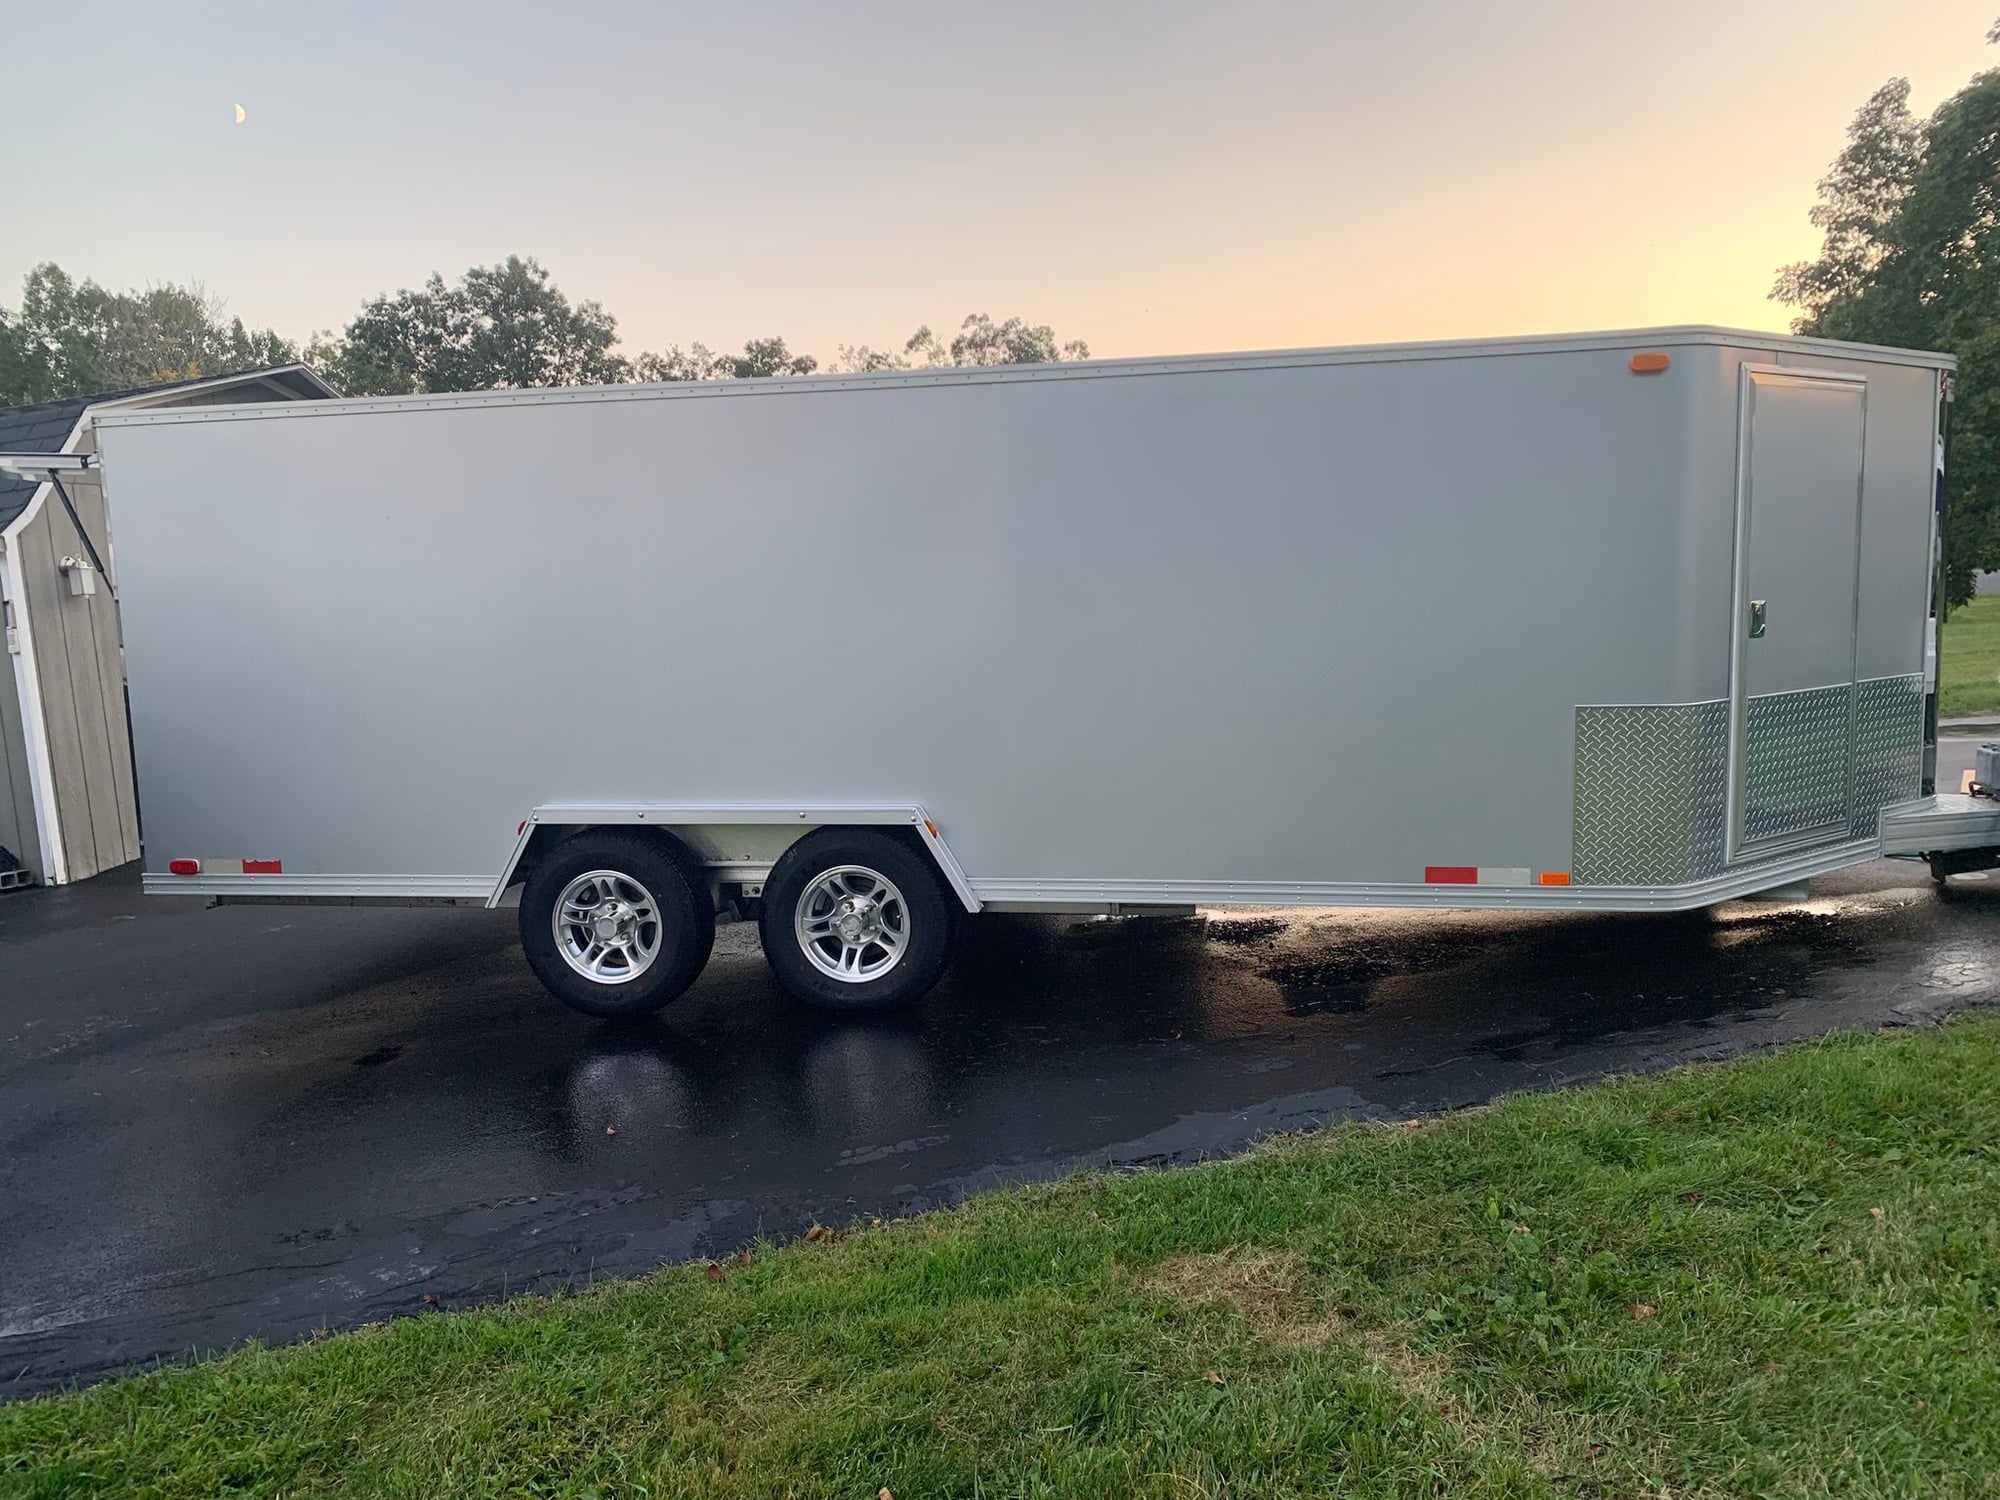 Miscellaneous - Trailex Sports Car Trailer model 84180T 2015 like new condition. - Used - 2015 to 0  All Models - Clayton, NY 13624, United States